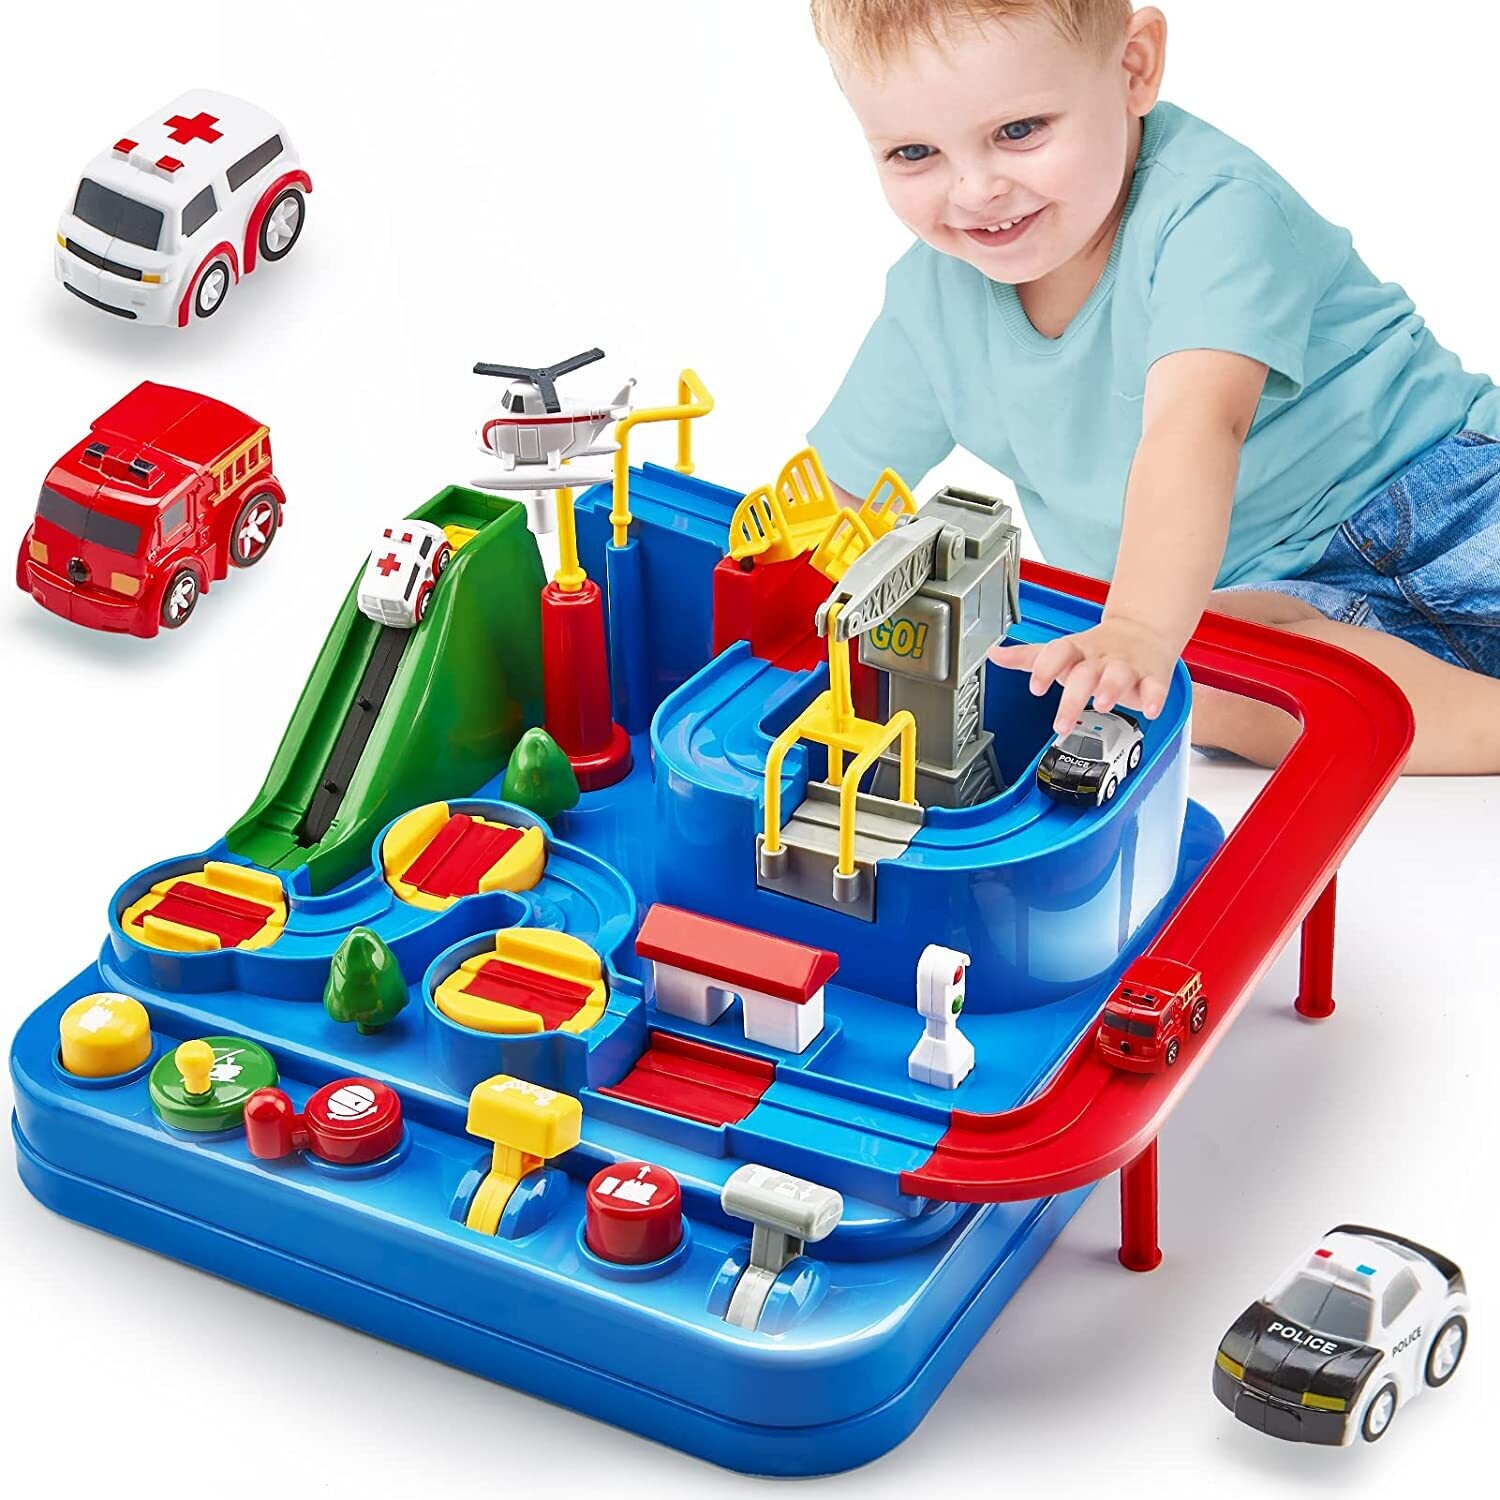 LARGE Race Track Car Adventure Toys for 3 Year Old Boys